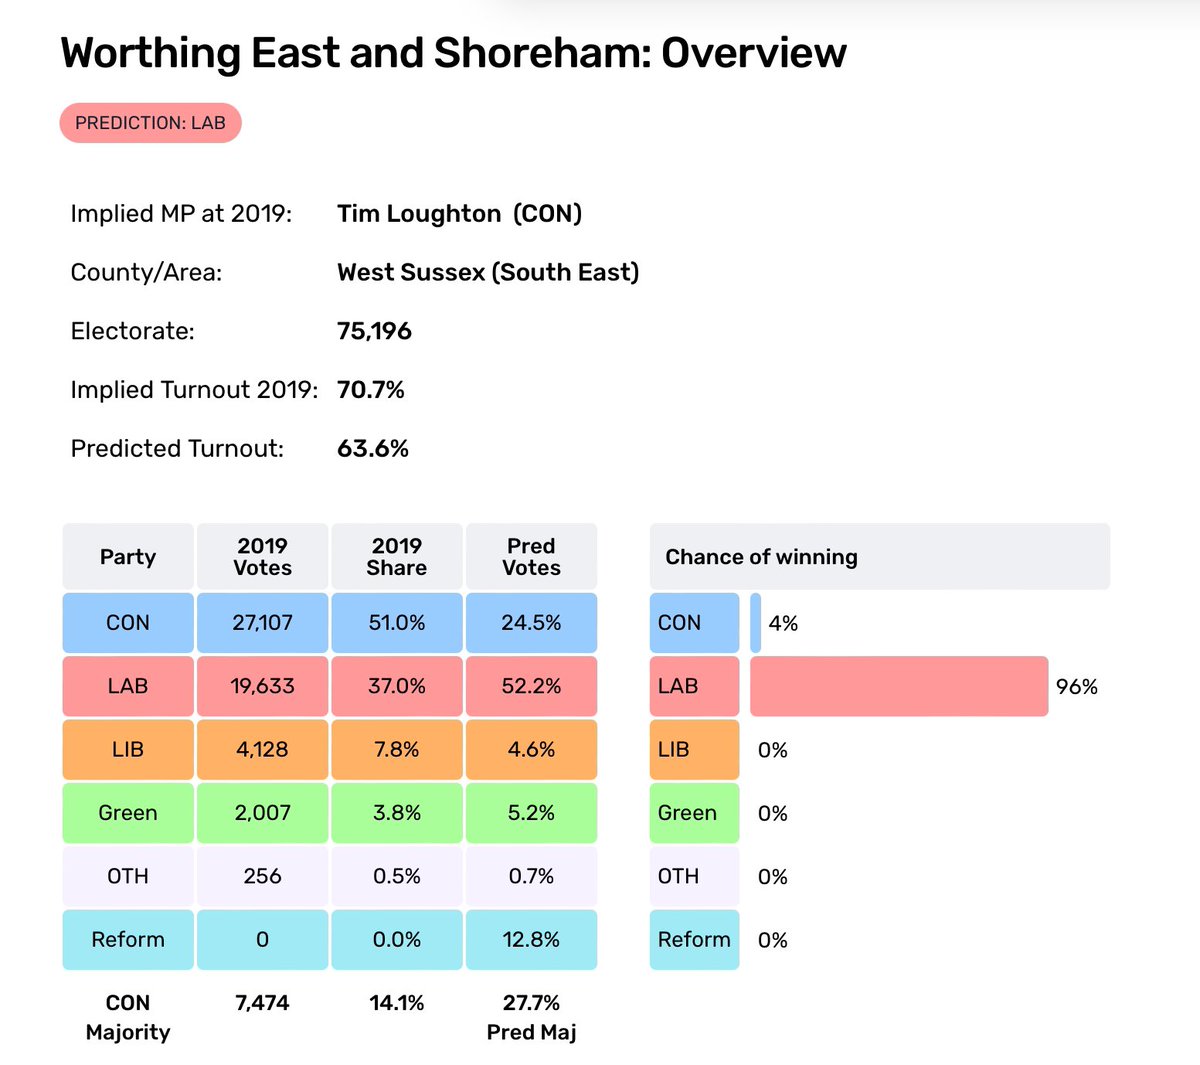 @dave43law Sound decision after nearly five years of ignoring the electorate, as he has only a 4% chance of keeping his seat.
#Worthing #Shoreham
⬇️🚢🐀